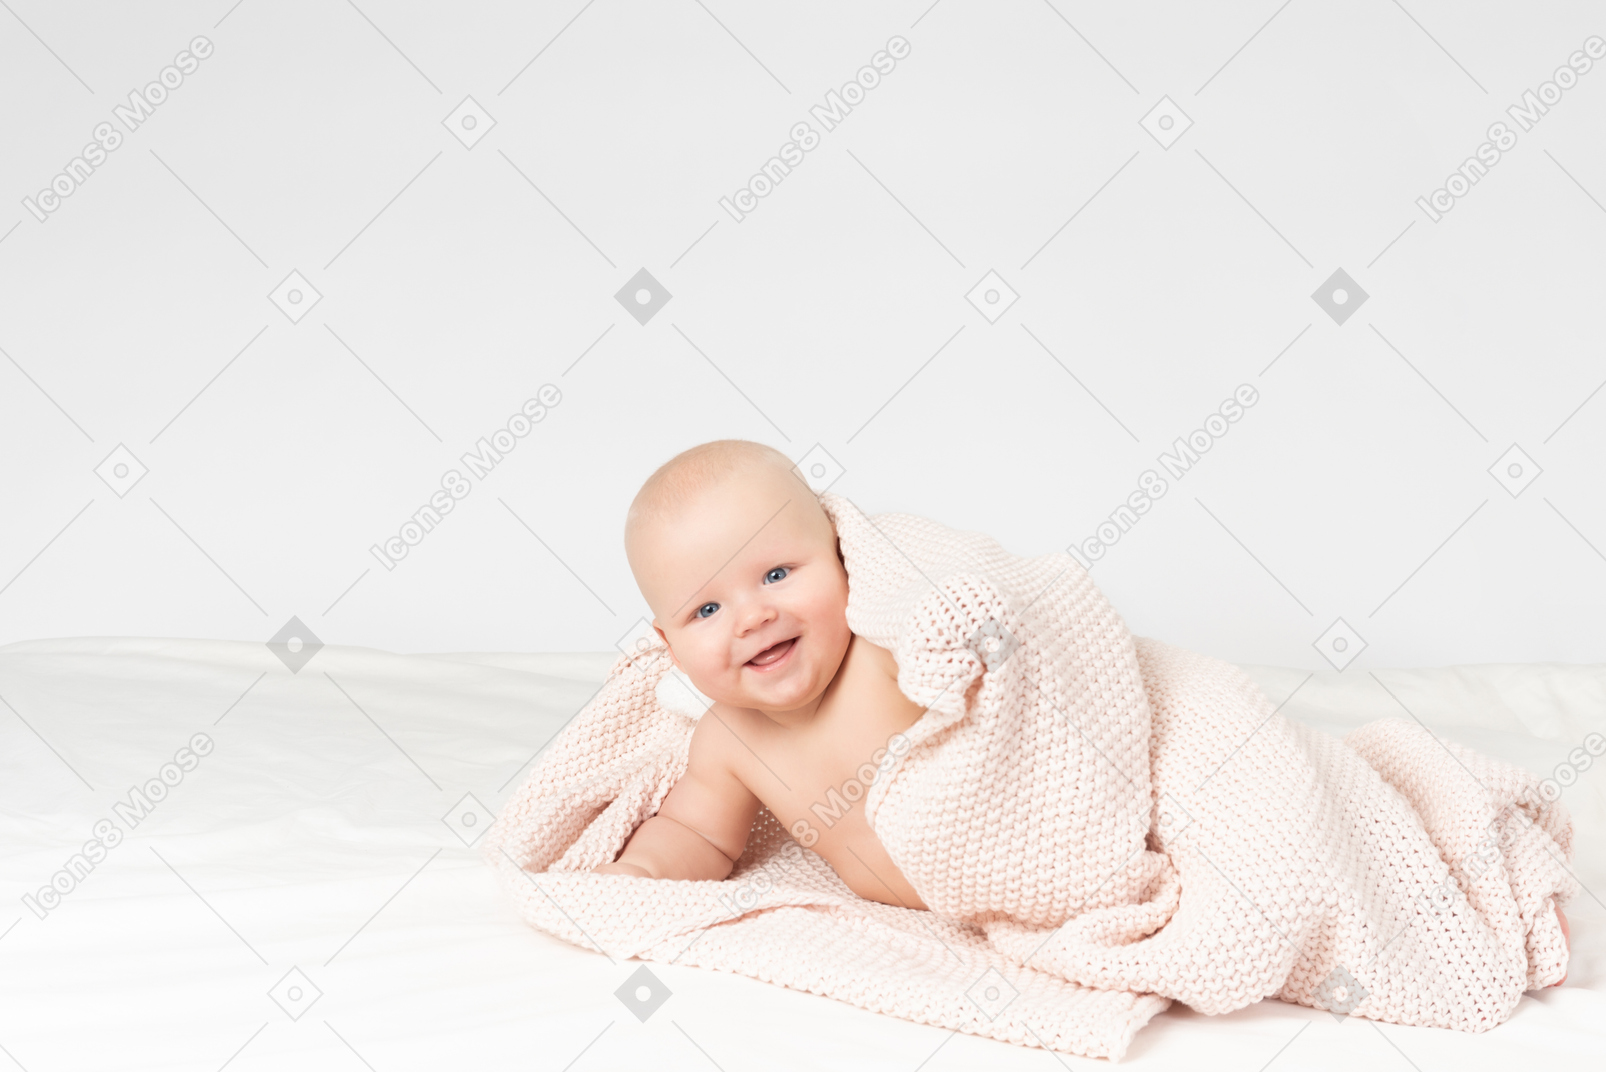 Smiling baby boy covered in beige knitted blanket